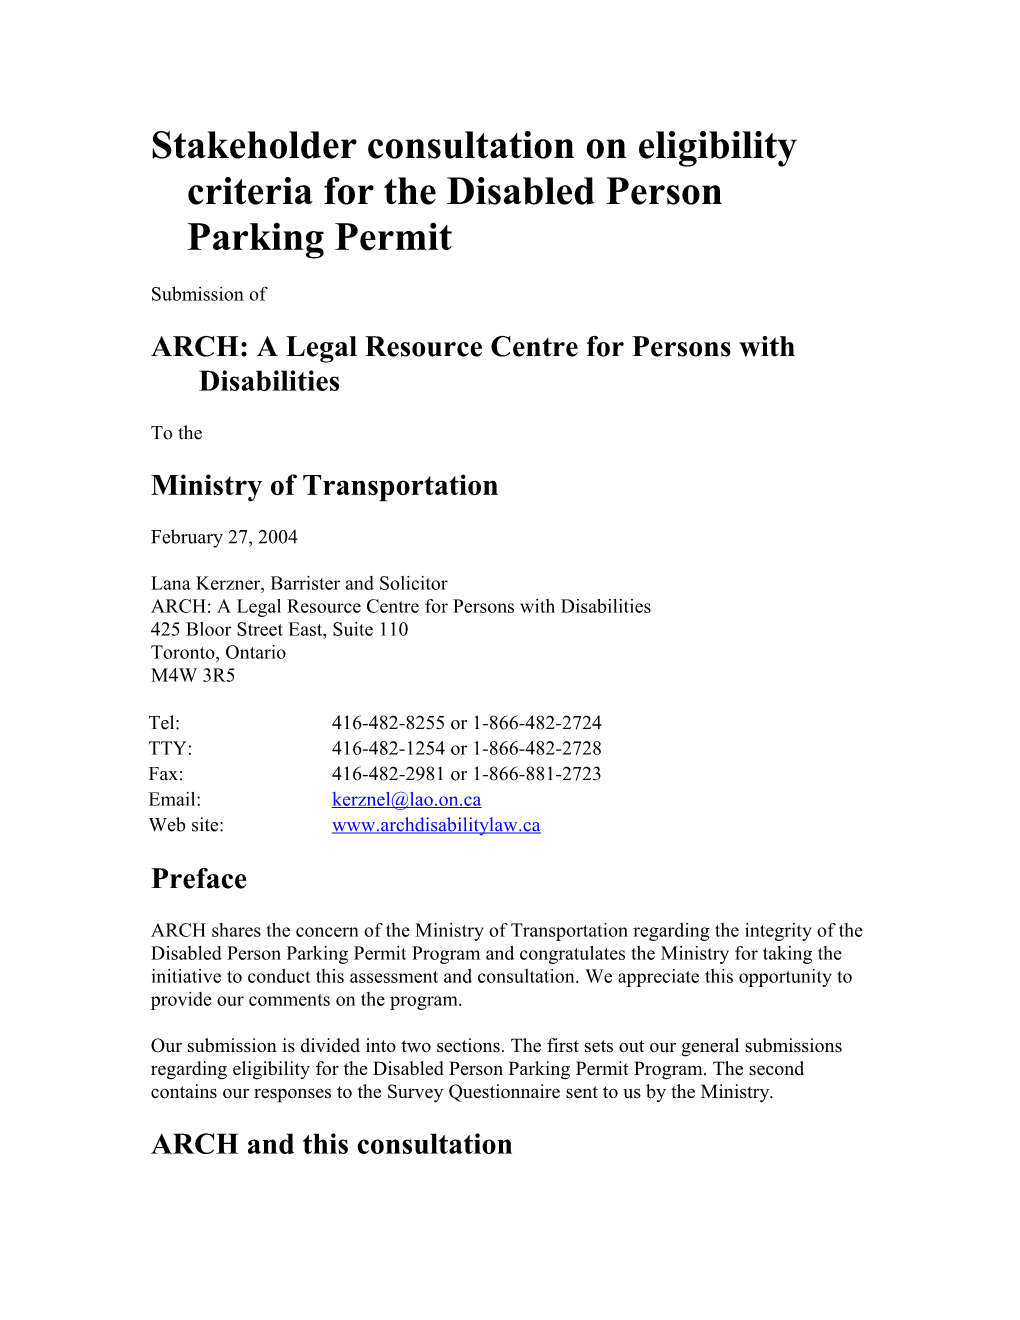 Stakeholder Consultation on Eligibility Criteria for the Disabled Person Parking Permit